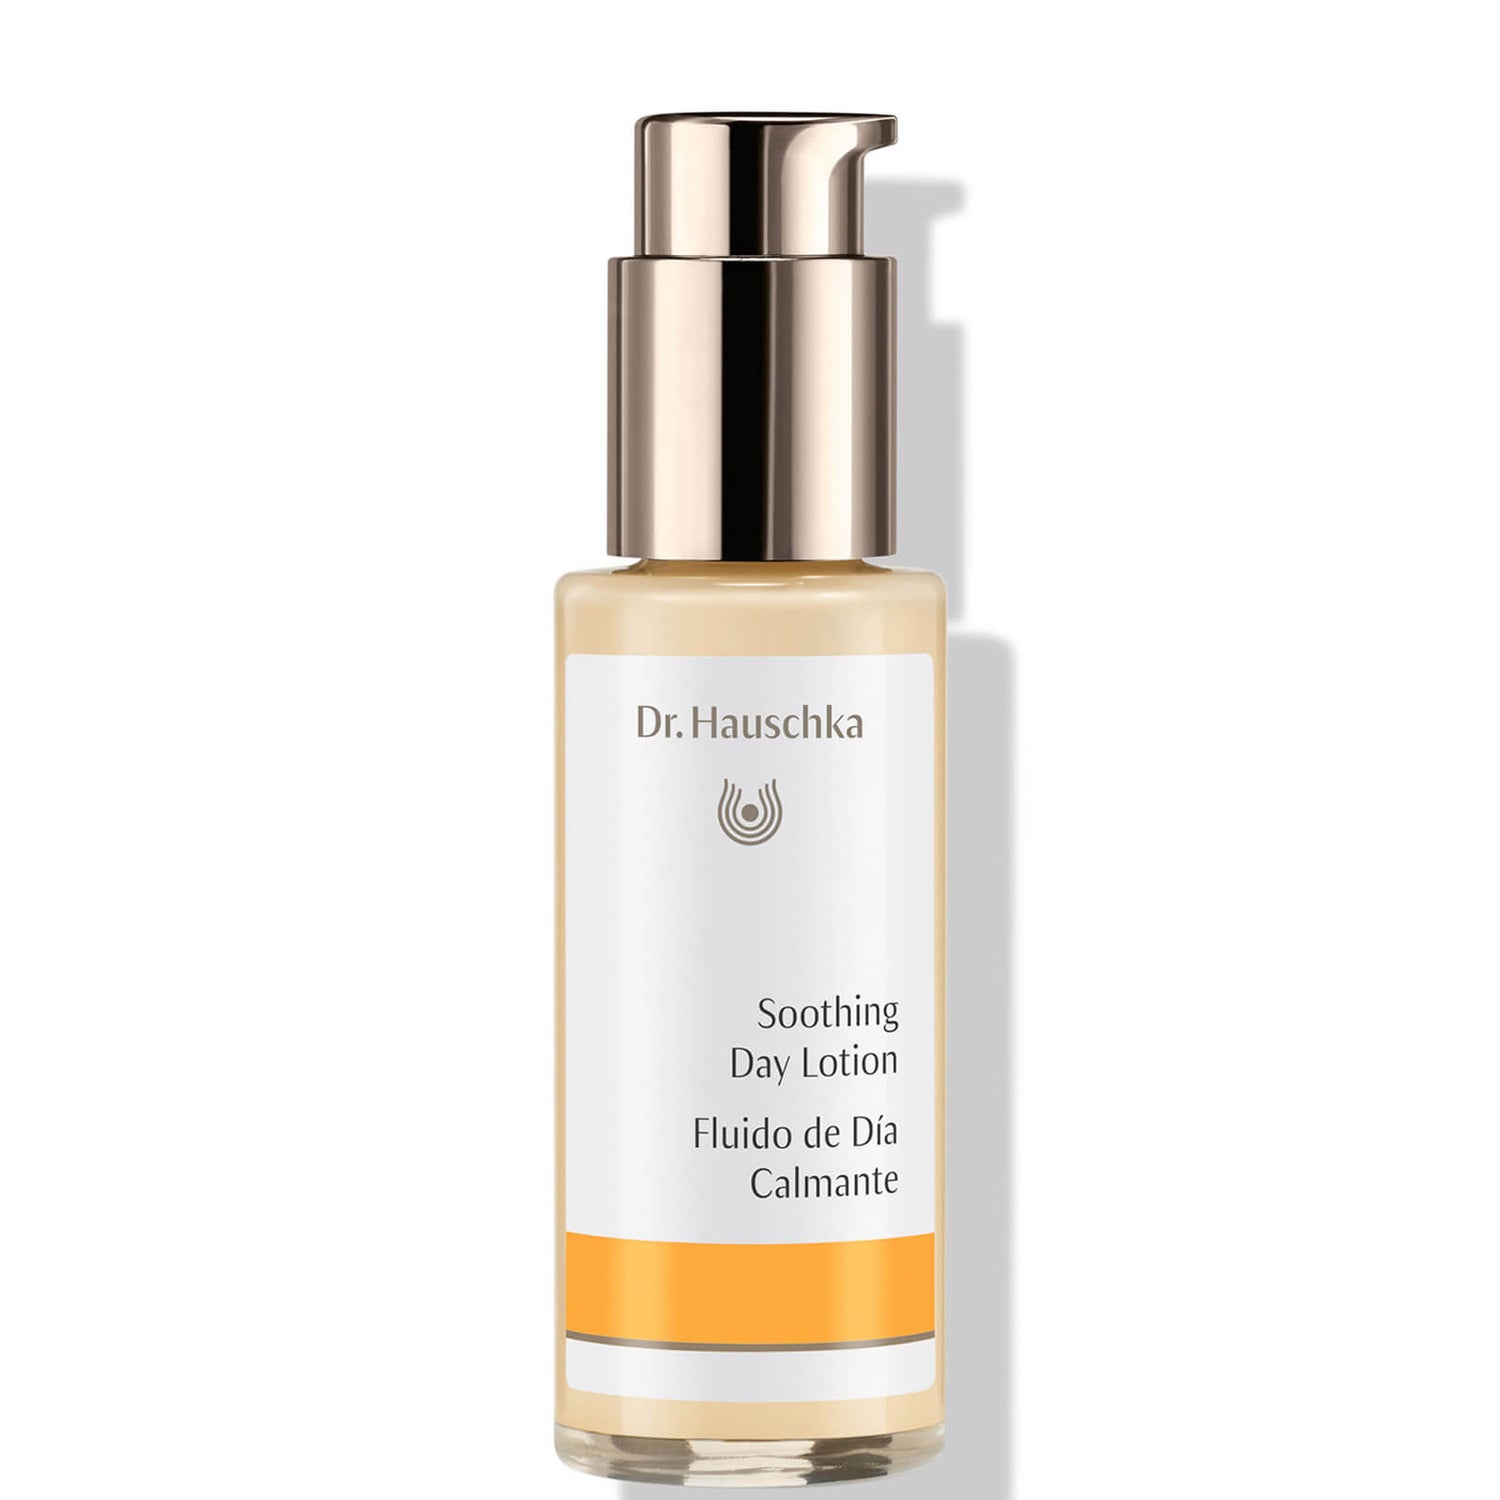 Dr. Hauschka Soothing Day Lotion (1.7 fl. oz)